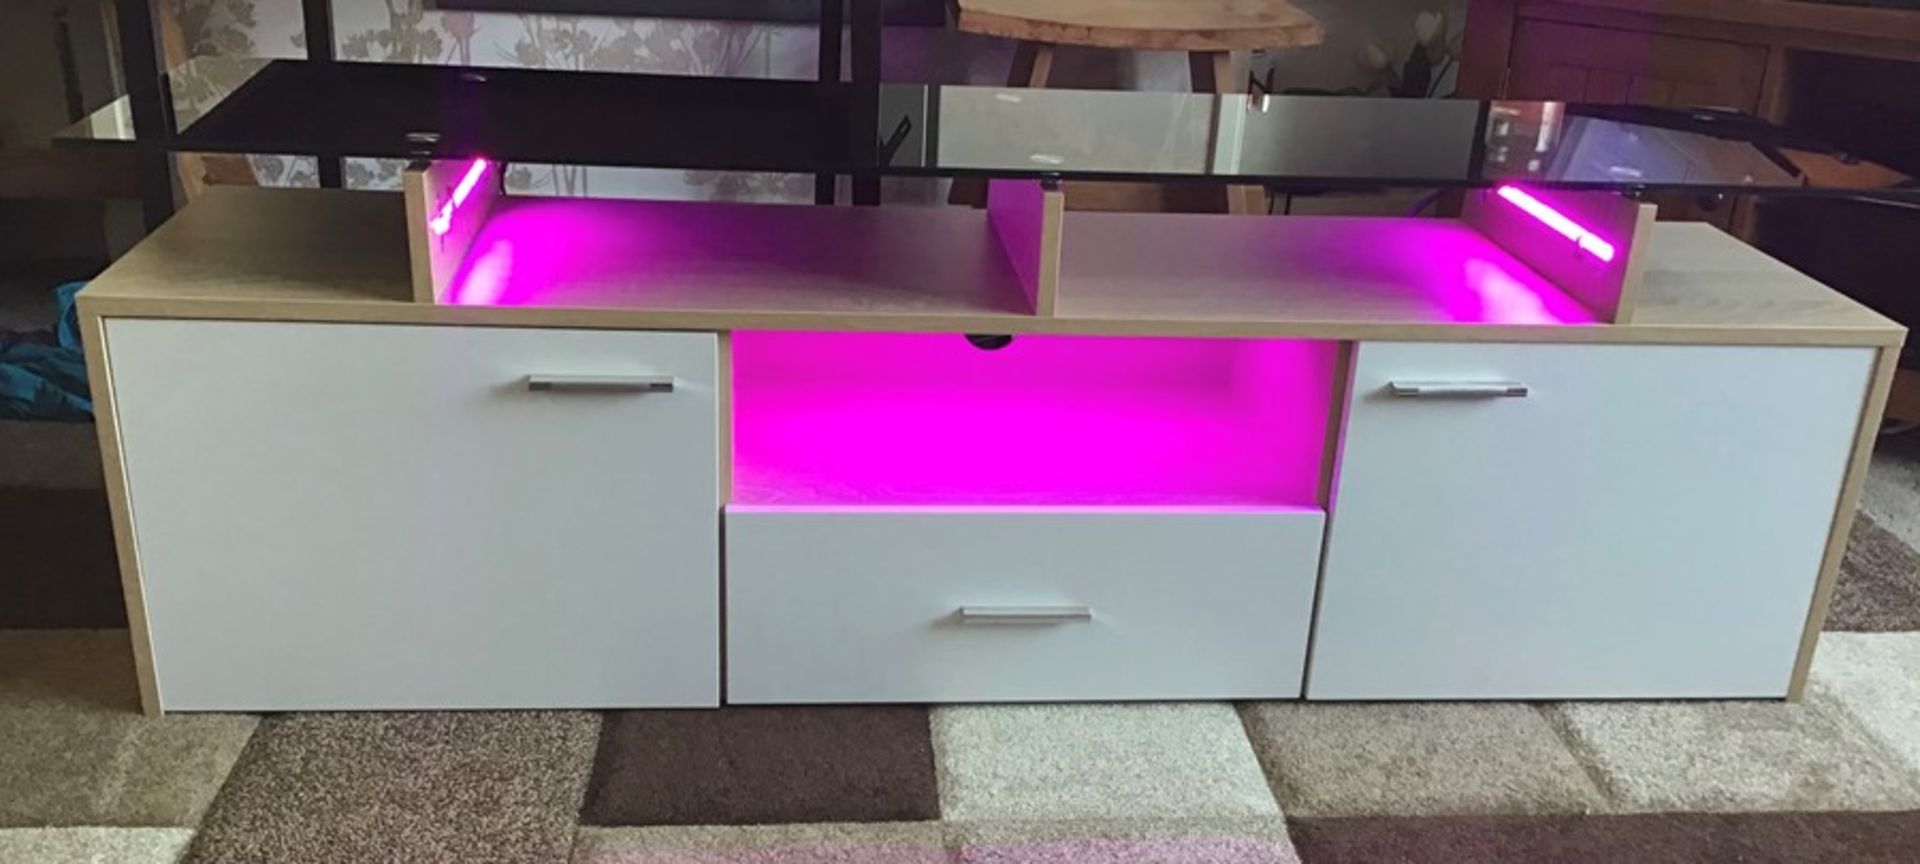 White and oak Melamine TV unit with 9 colour LED lighting, brand new and boxed. RRP Circa £160.00